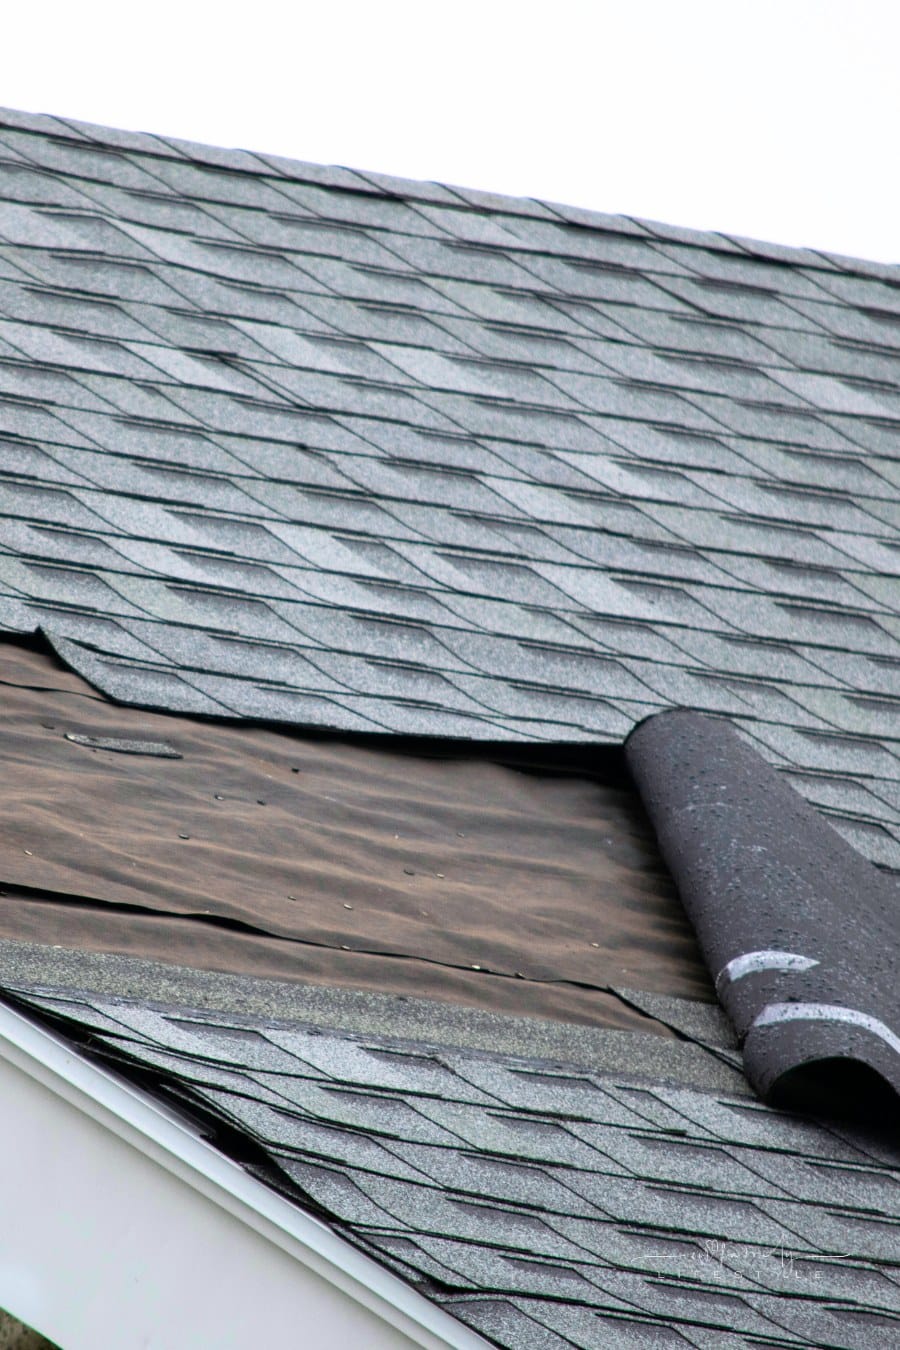 curled, damaged roof shingles on house